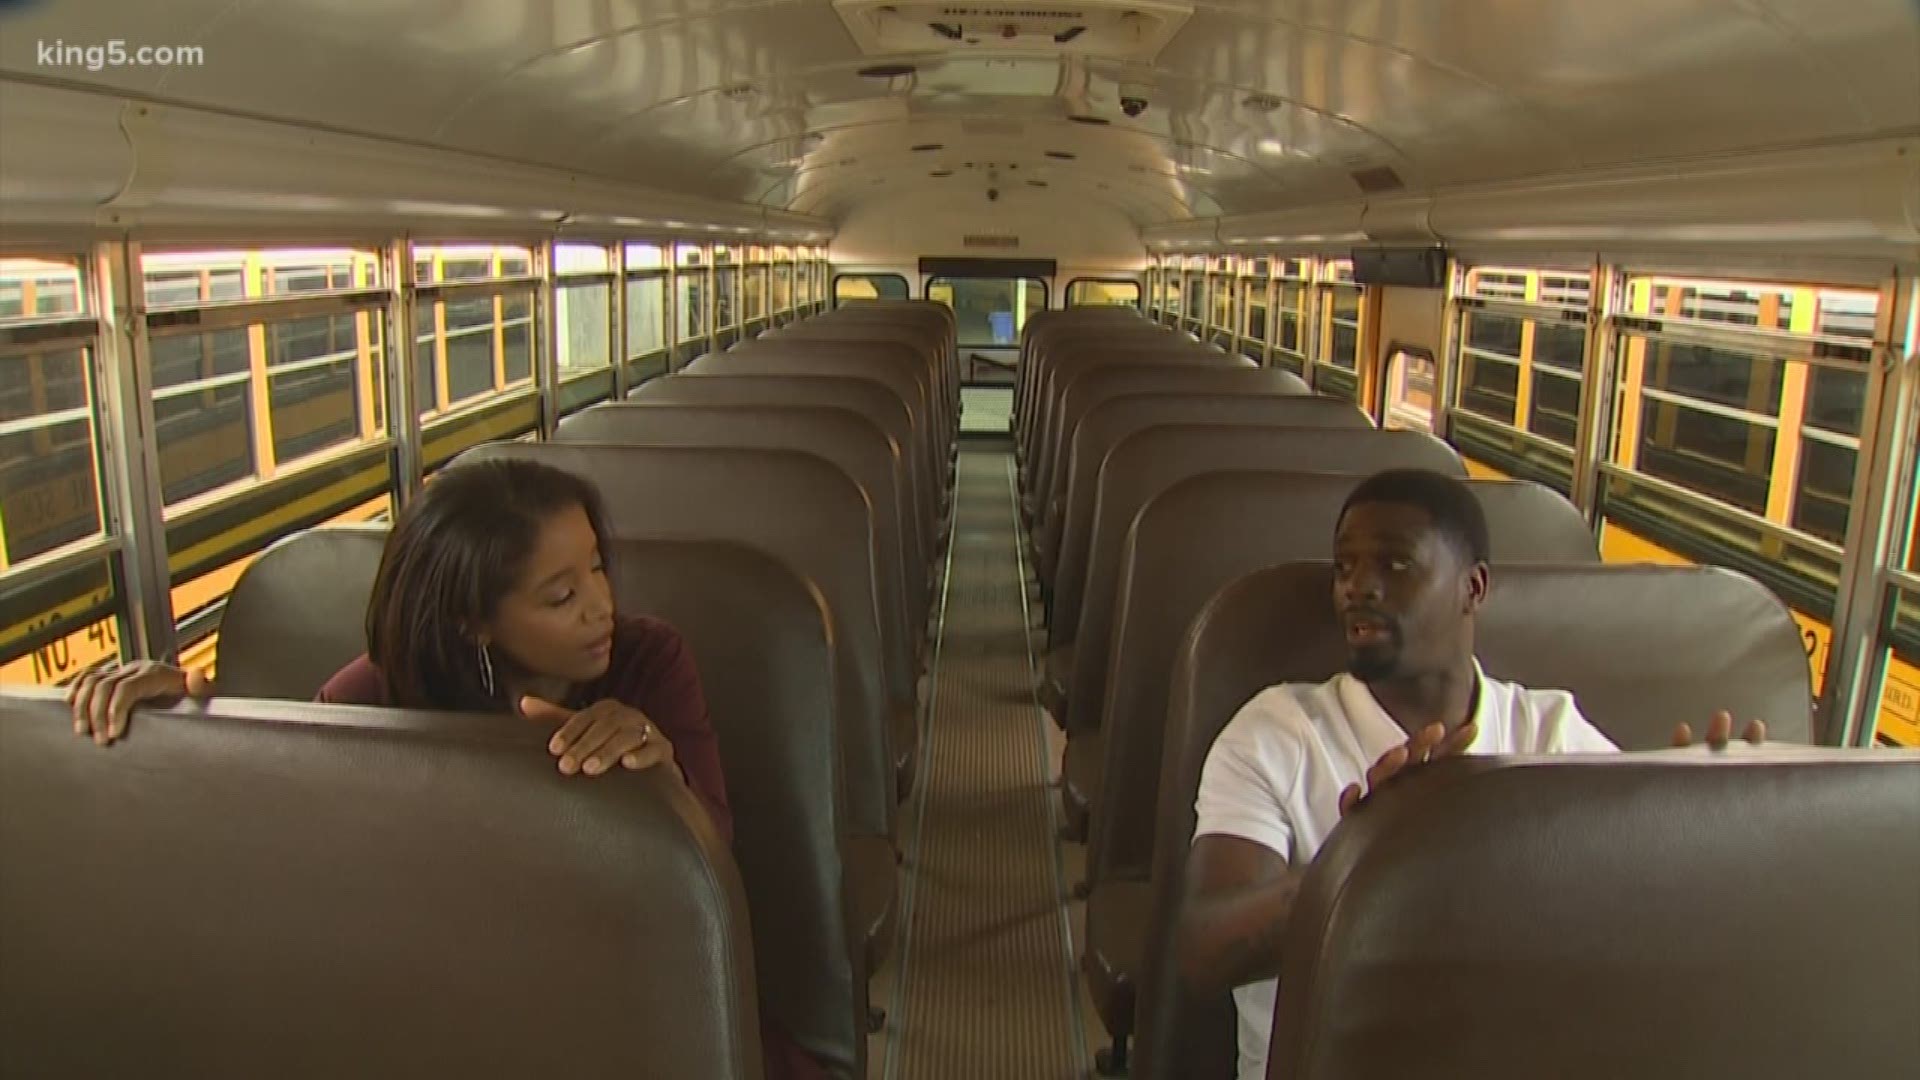 We all need to know how to safely navigate around school buses. We met up with Theo White, a bus dispatcher in the Highline School District, to get his take.